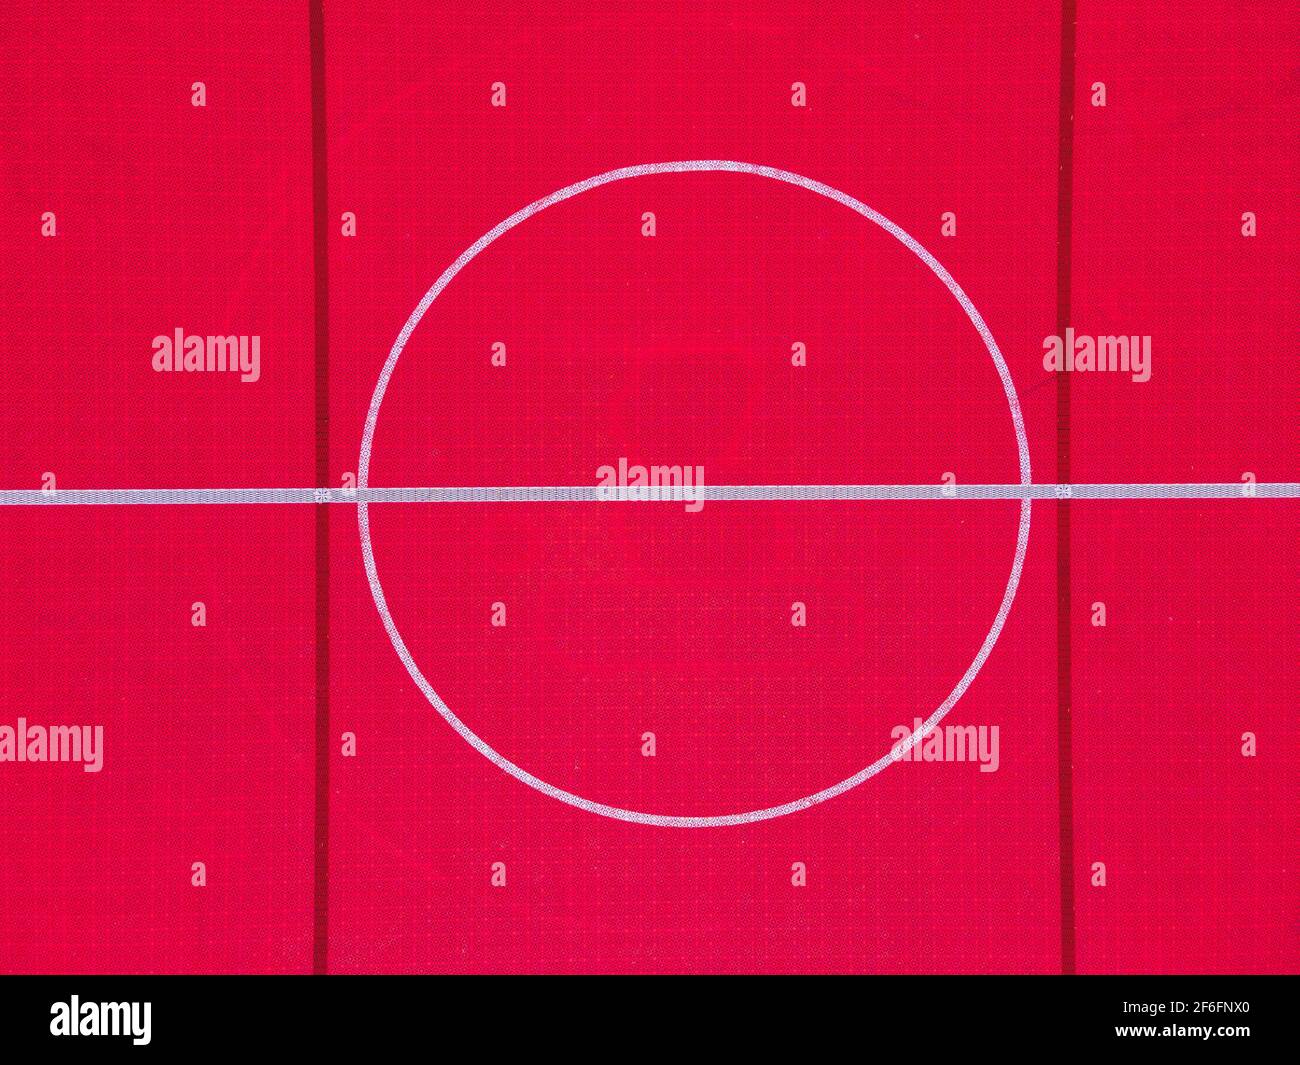 Plastic outdoor basketball court  floor, detail. Outdoor sport ground with red surface for playing basketball  in urban area, above. Stock Photo